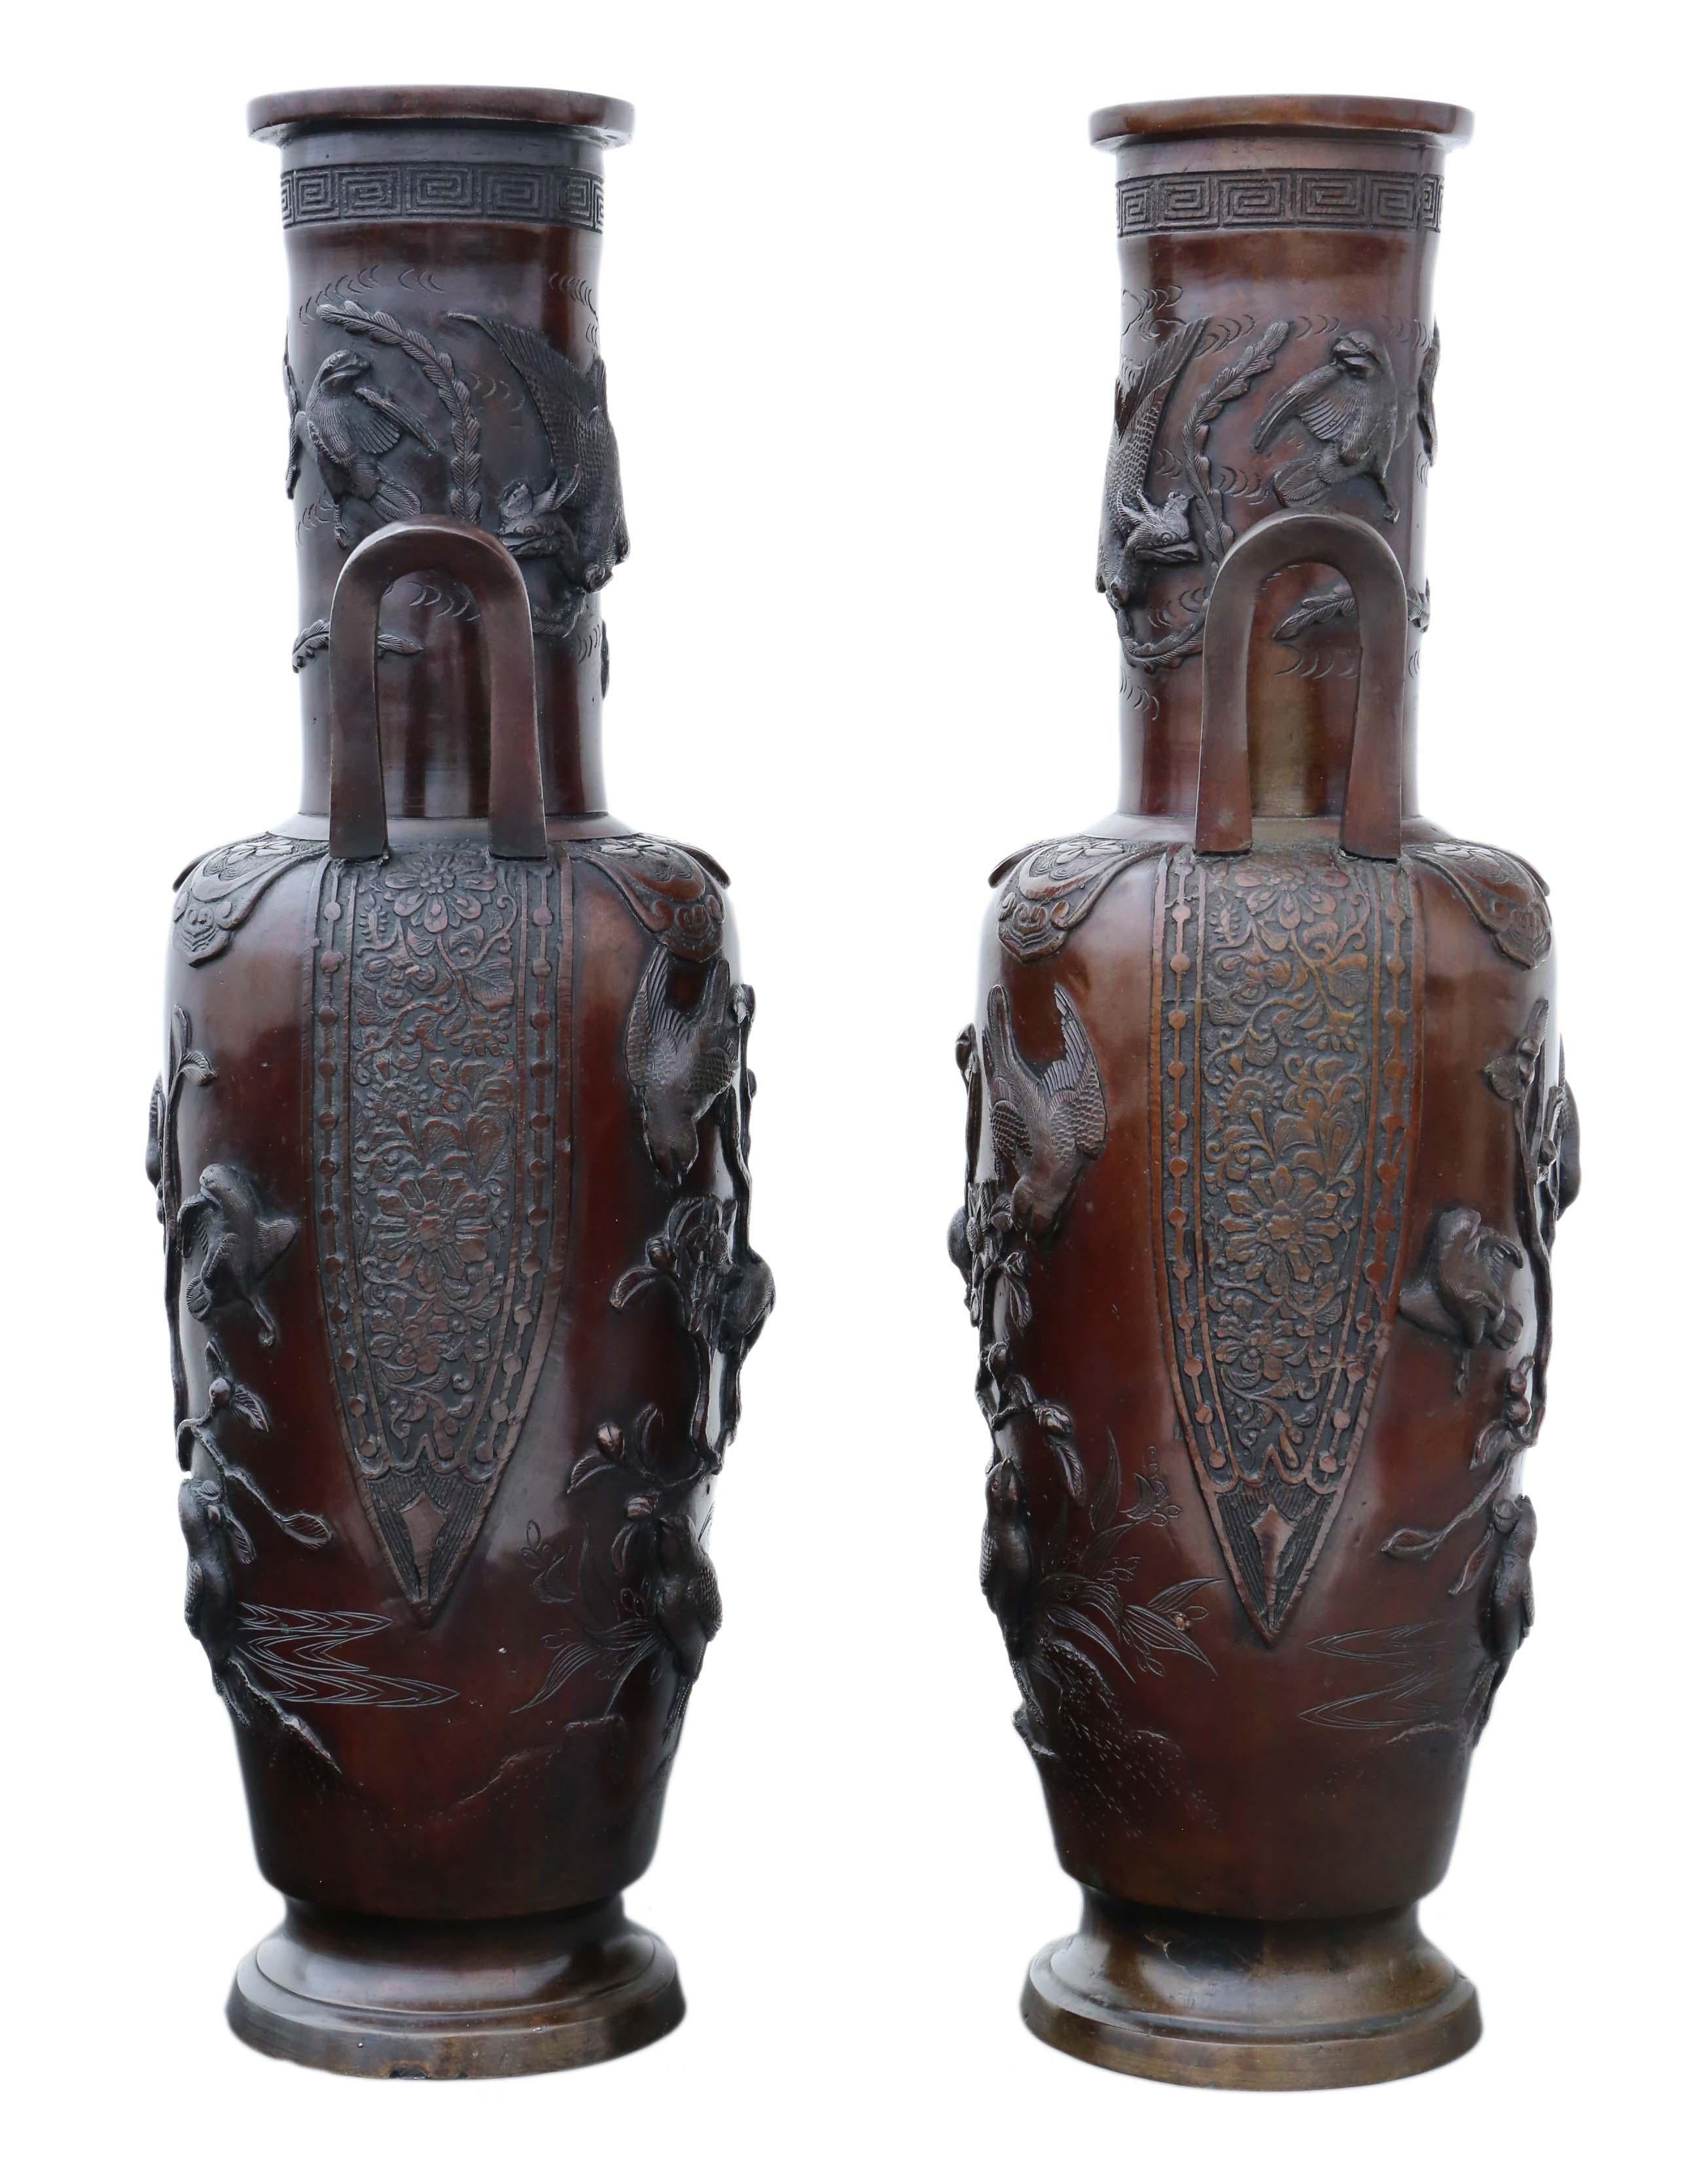 Antique large fine quality pair of Japanese bronze vases. Late 19th century Meiji period. 

Would look amazing in the right location. The very best color and patina.

Overall maximum dimensions: 50cm high x 18cm diameter. Weigh 5.2Kg each.

In